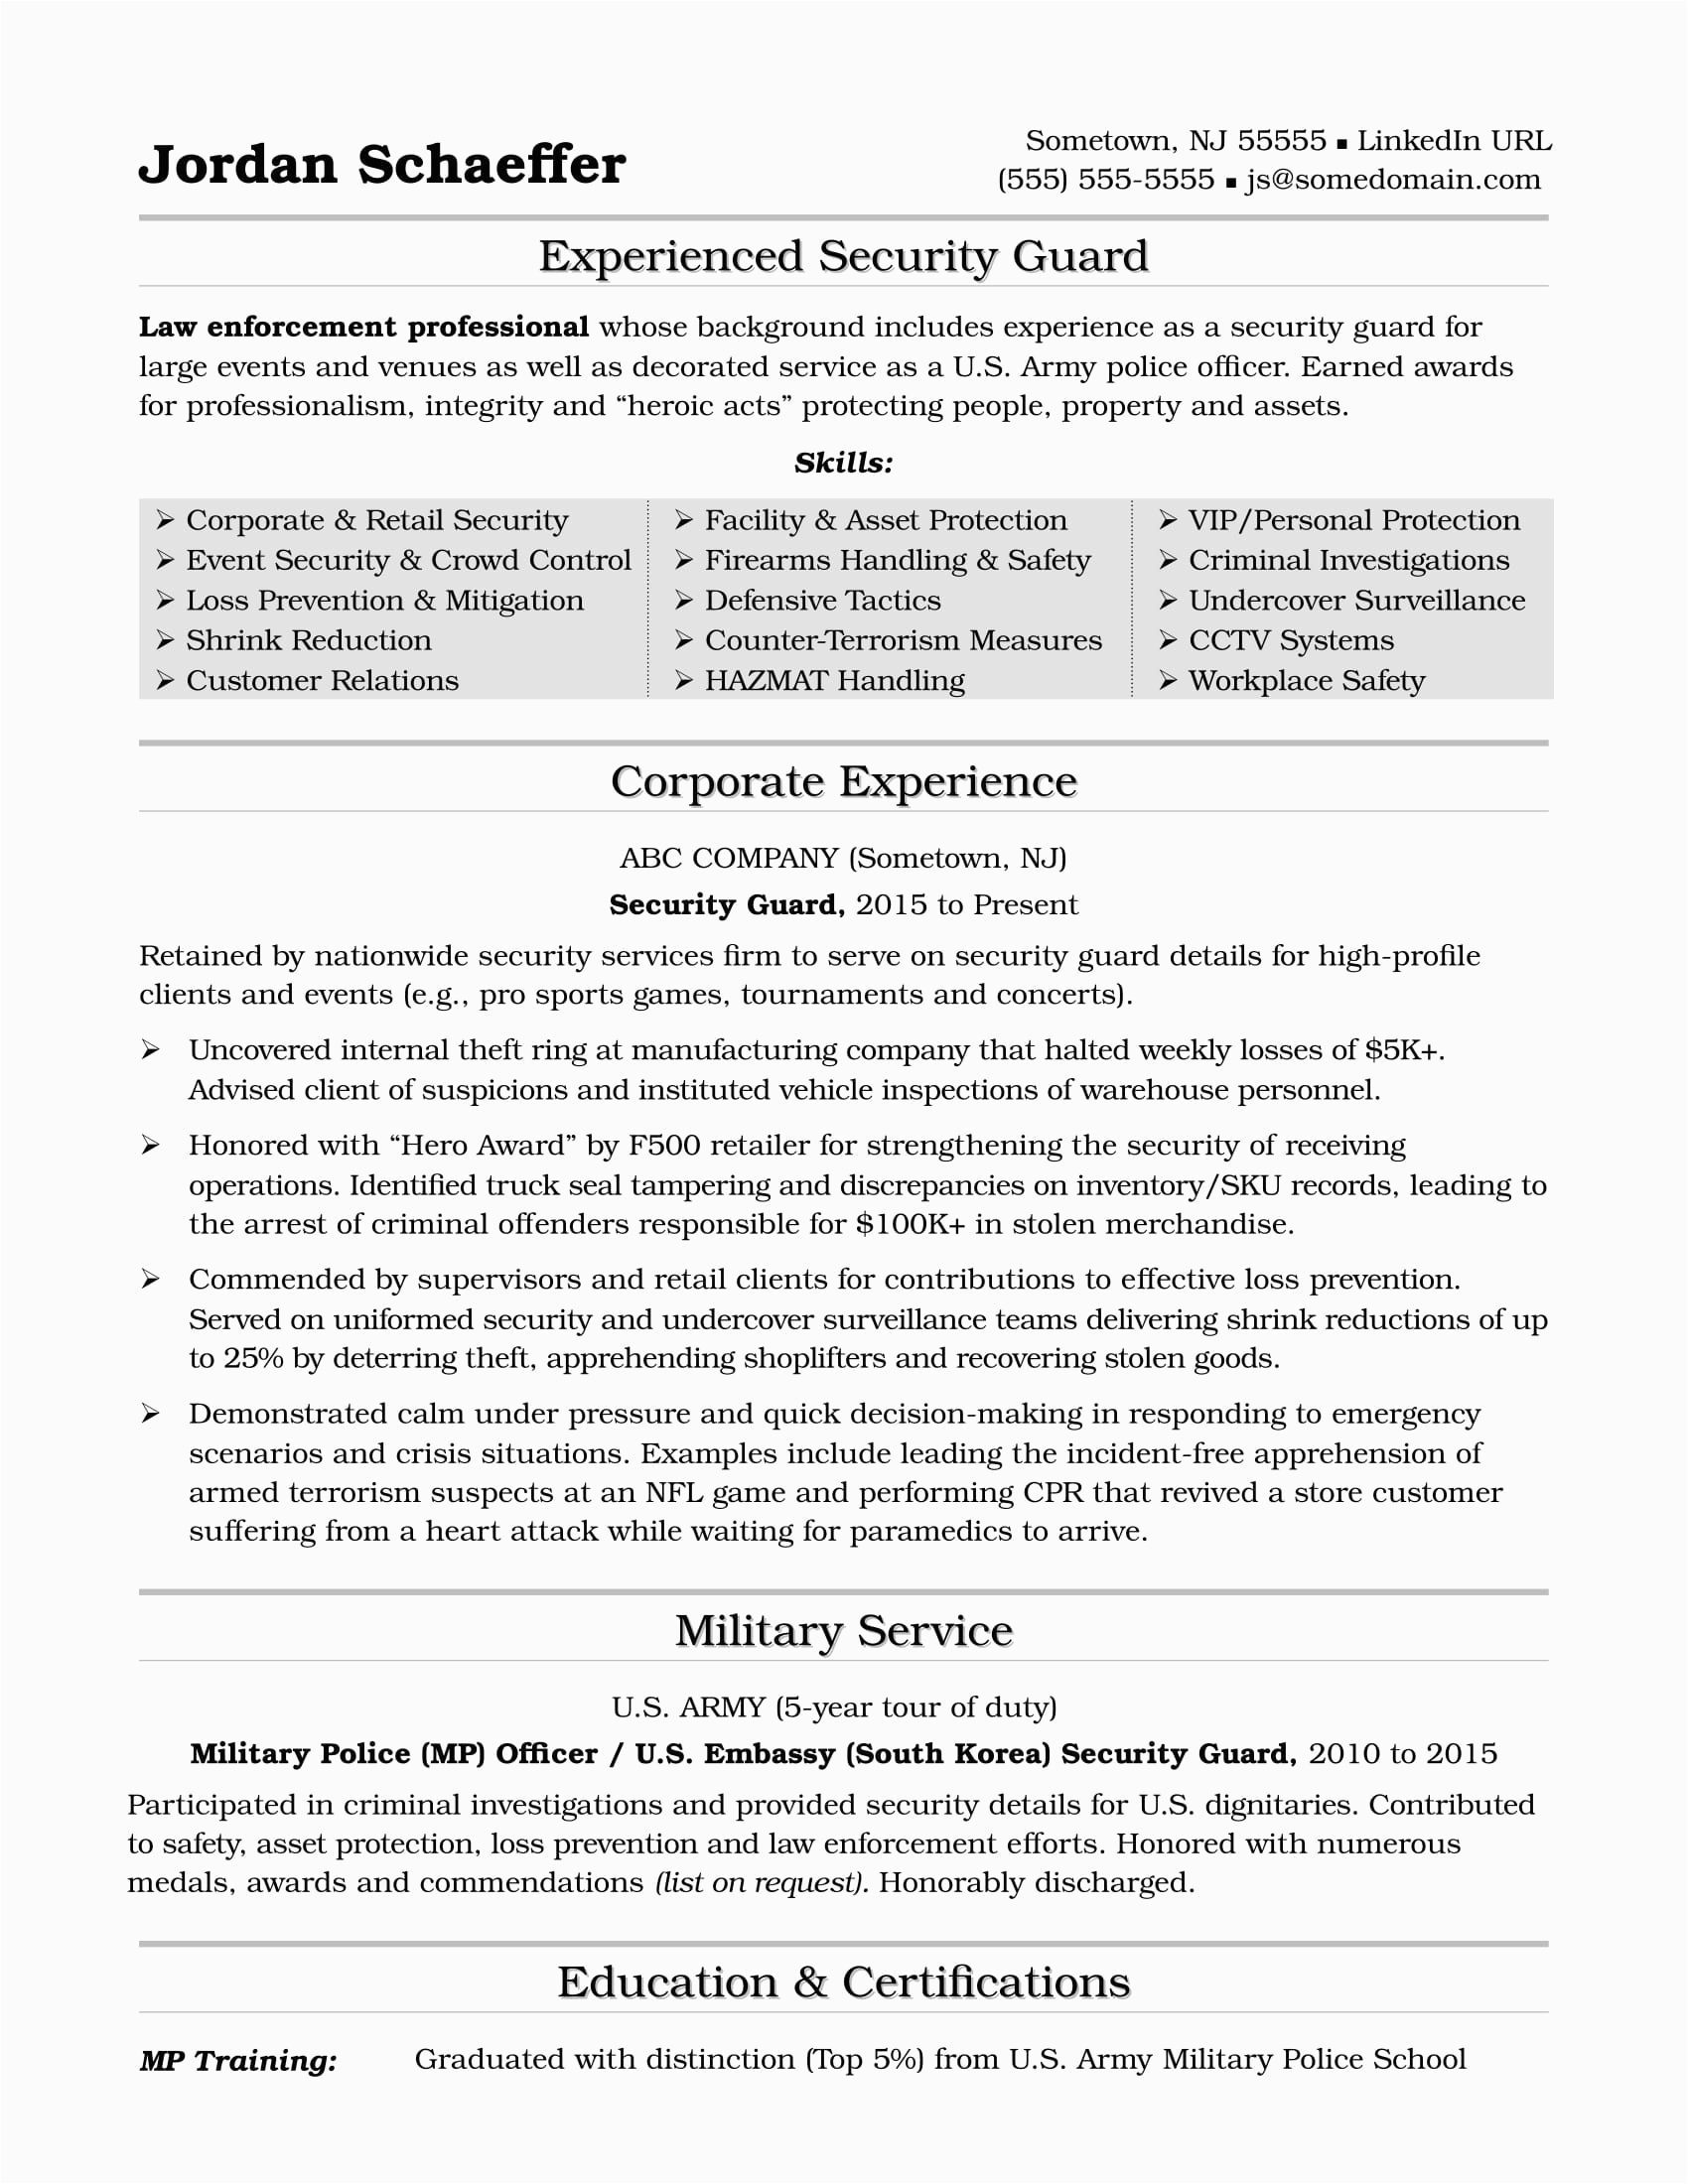 Security Officer Resume Examples and Samples Security Guard Resume Sample